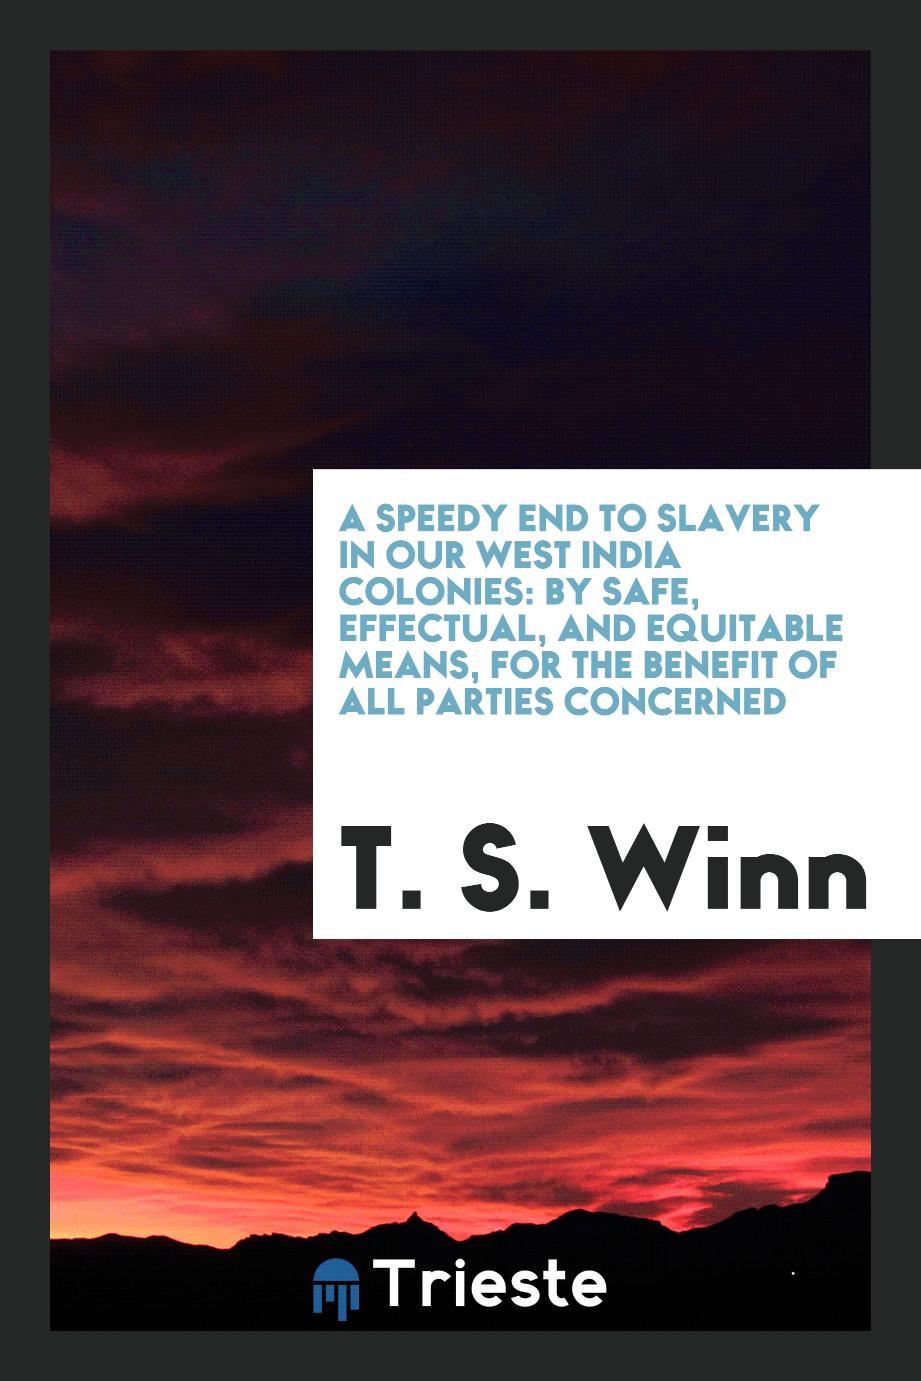 A Speedy End to Slavery in Our West India Colonies: By Safe, Effectual, and Equitable Means, for the Benefit of All Parties Concerned